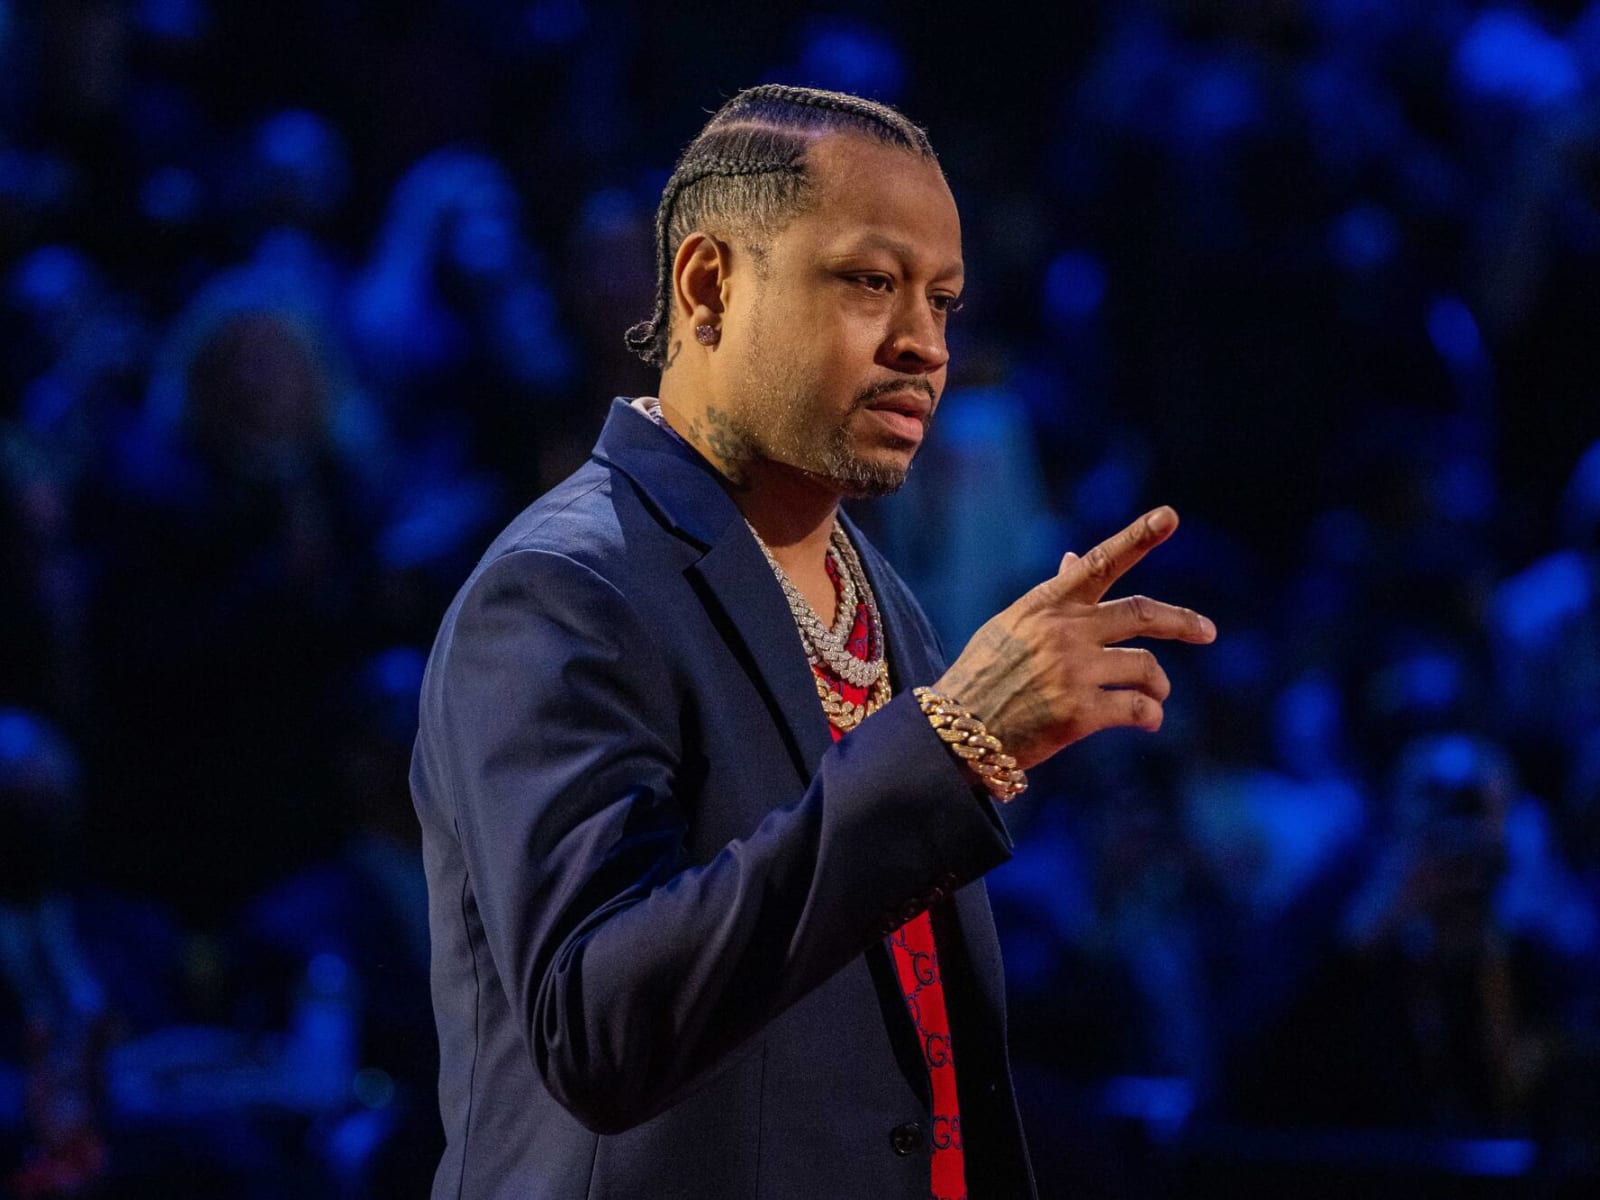 How Allen Iverson Shifted Style in the NBA